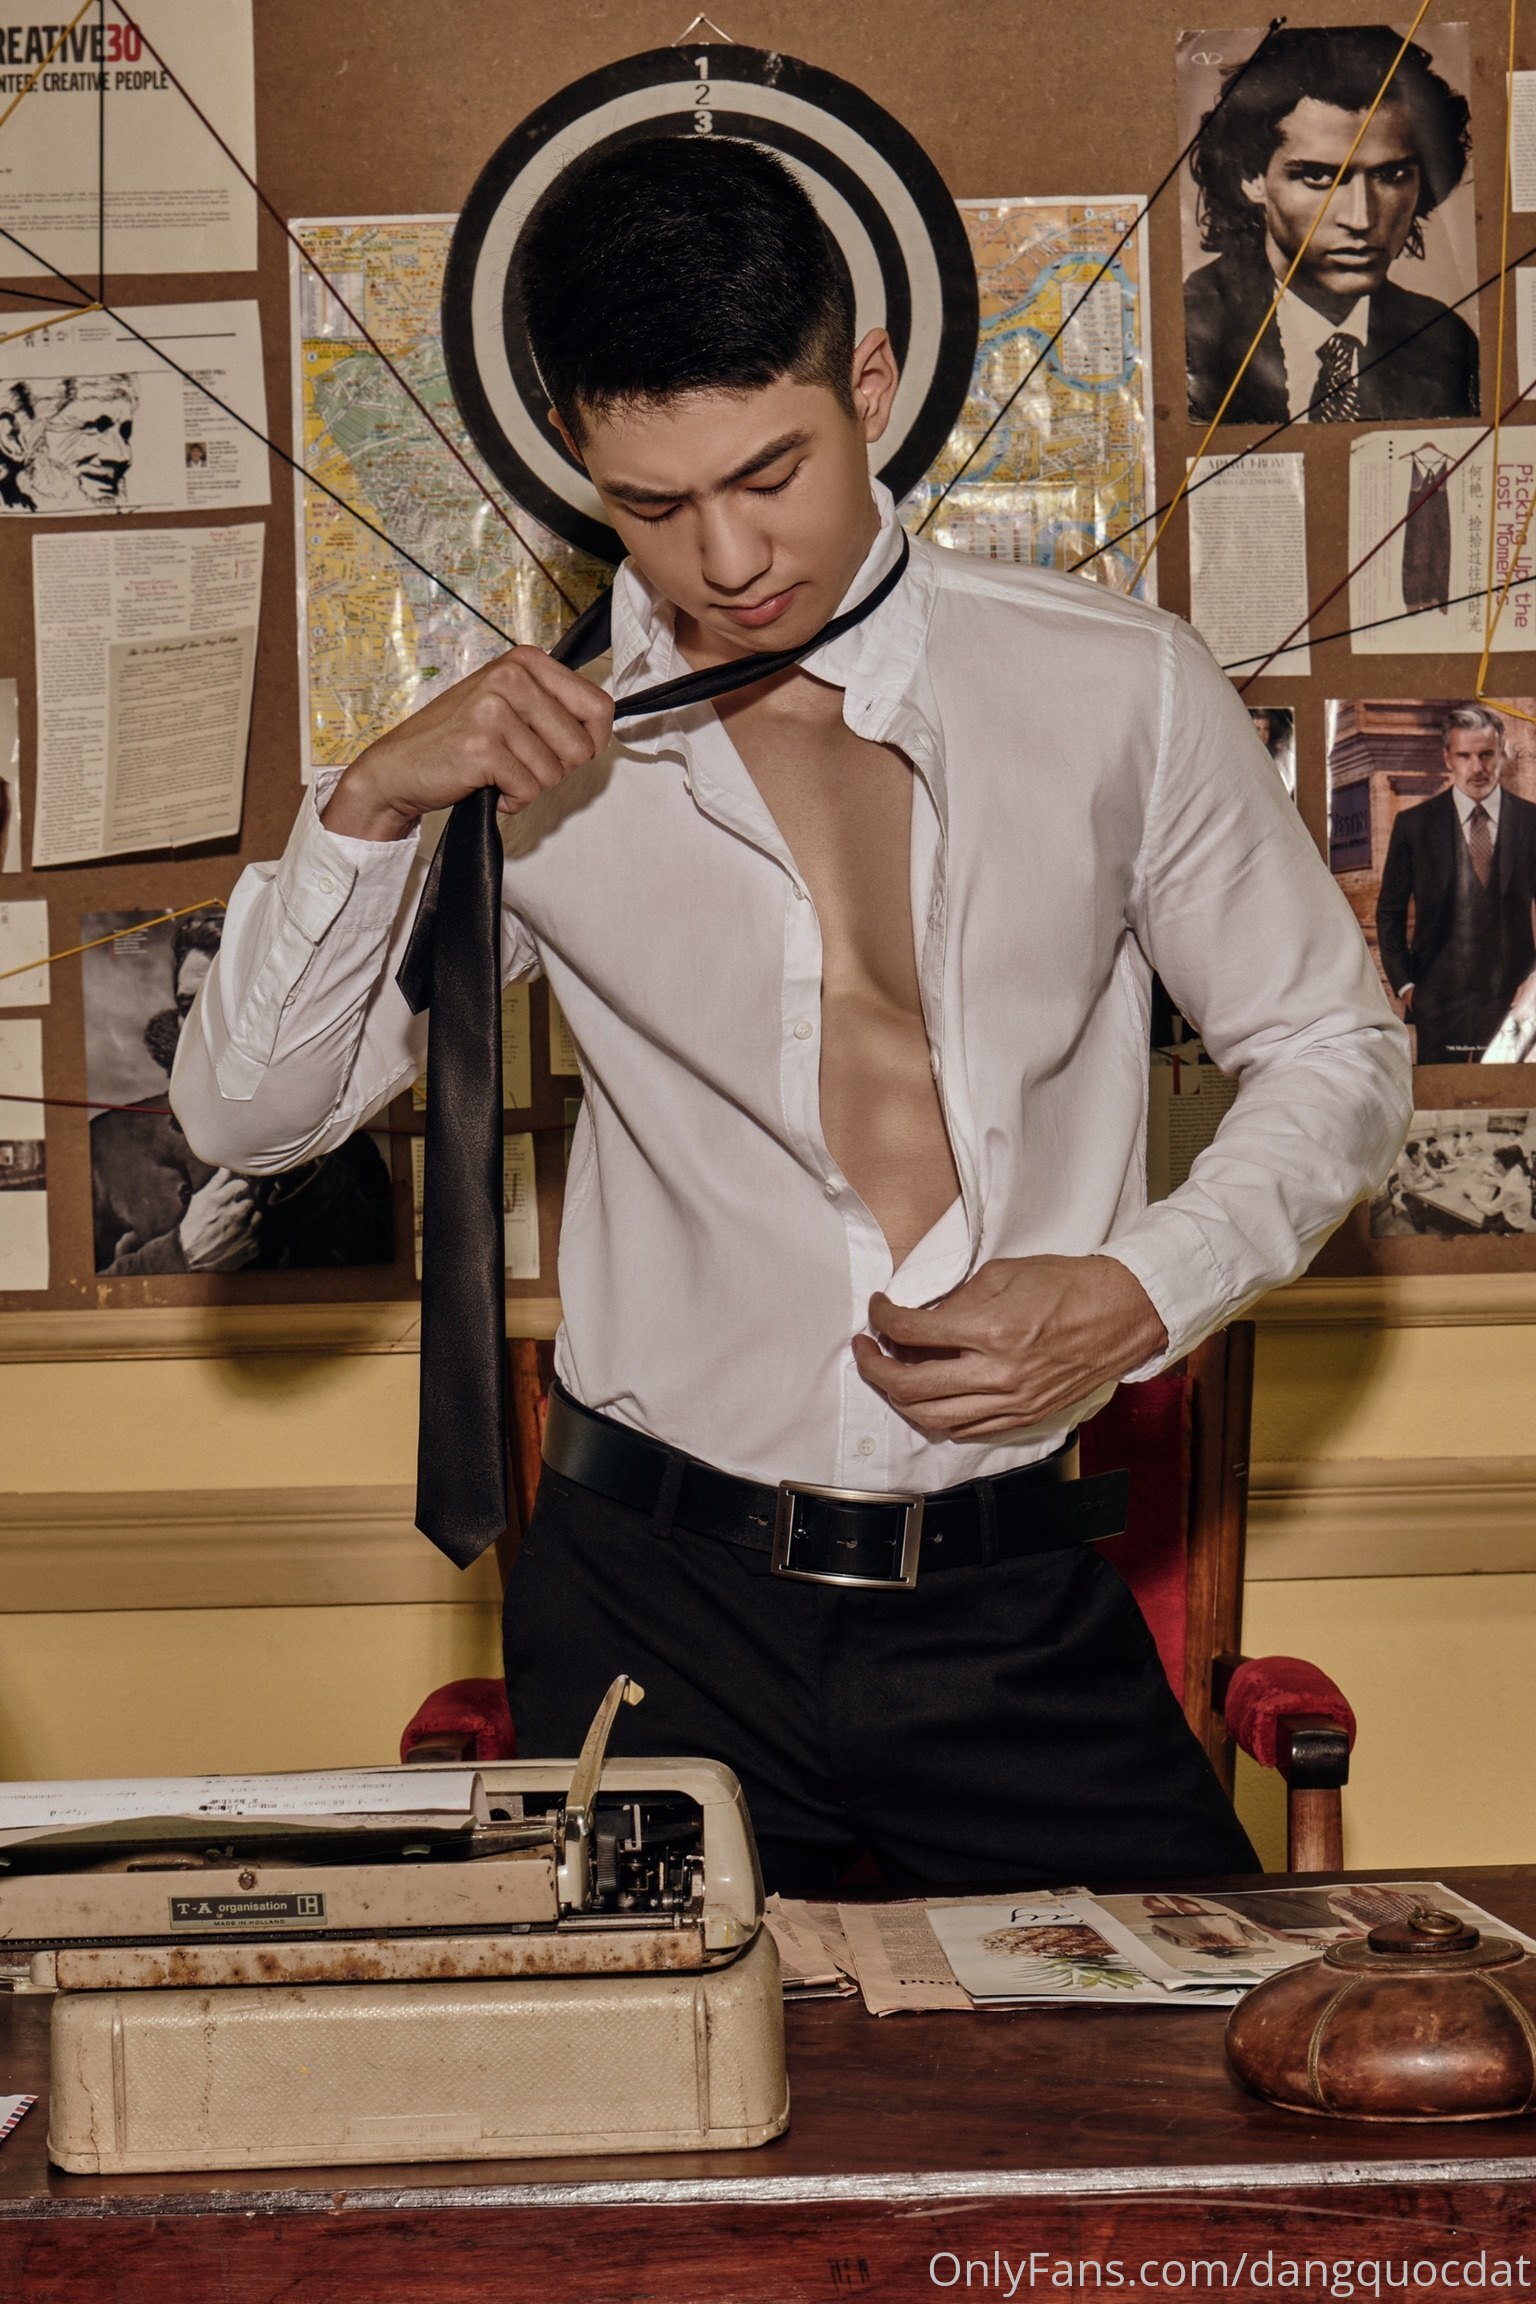 Dang Quoc Dat After work 完整版 越南肌肉网红男神 ‖ R+【PHOTO+VIDEO】